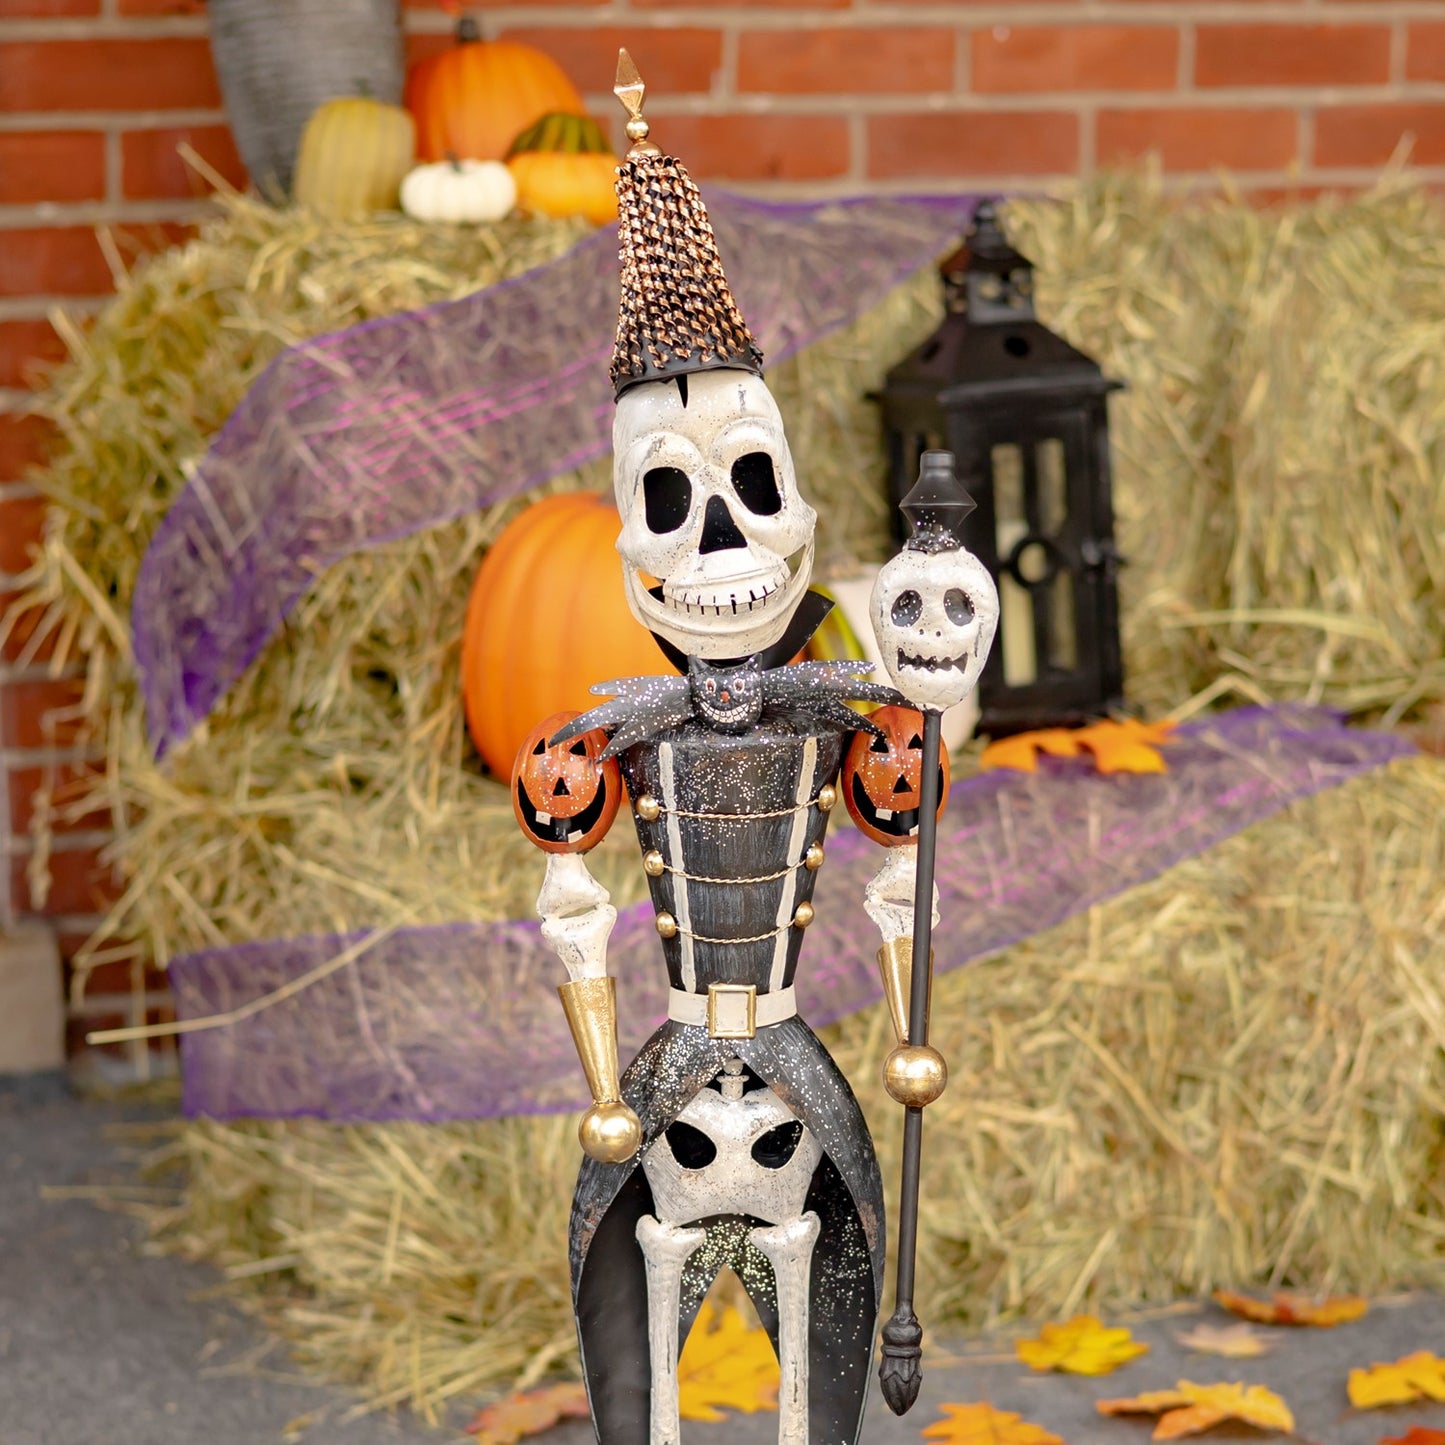 36" Tall Set of 2 Small Halloween Skeleton Soldiers Holding Staffs